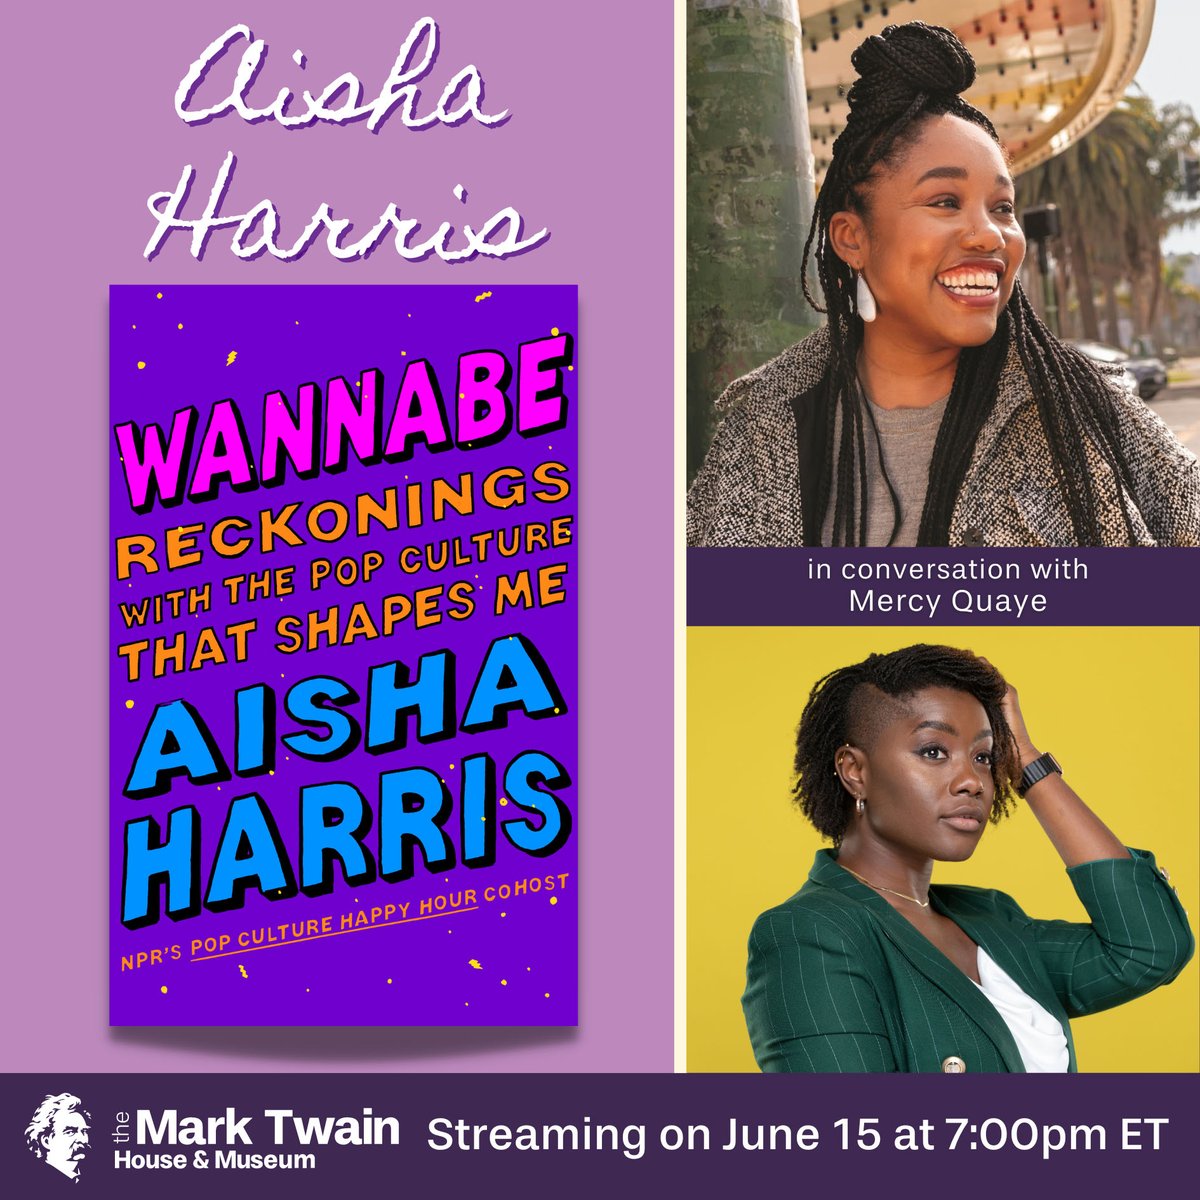 'Black art isn't fragile' -- Aisha Harris. 

If you're a consumer of art of any kind, but especially Black art, register to hear the words of the insanely talented @craftingmystyle with me tomorrow! 

Learn more & REGISTER HERE: marktwainhouse.org/event/reckonin…